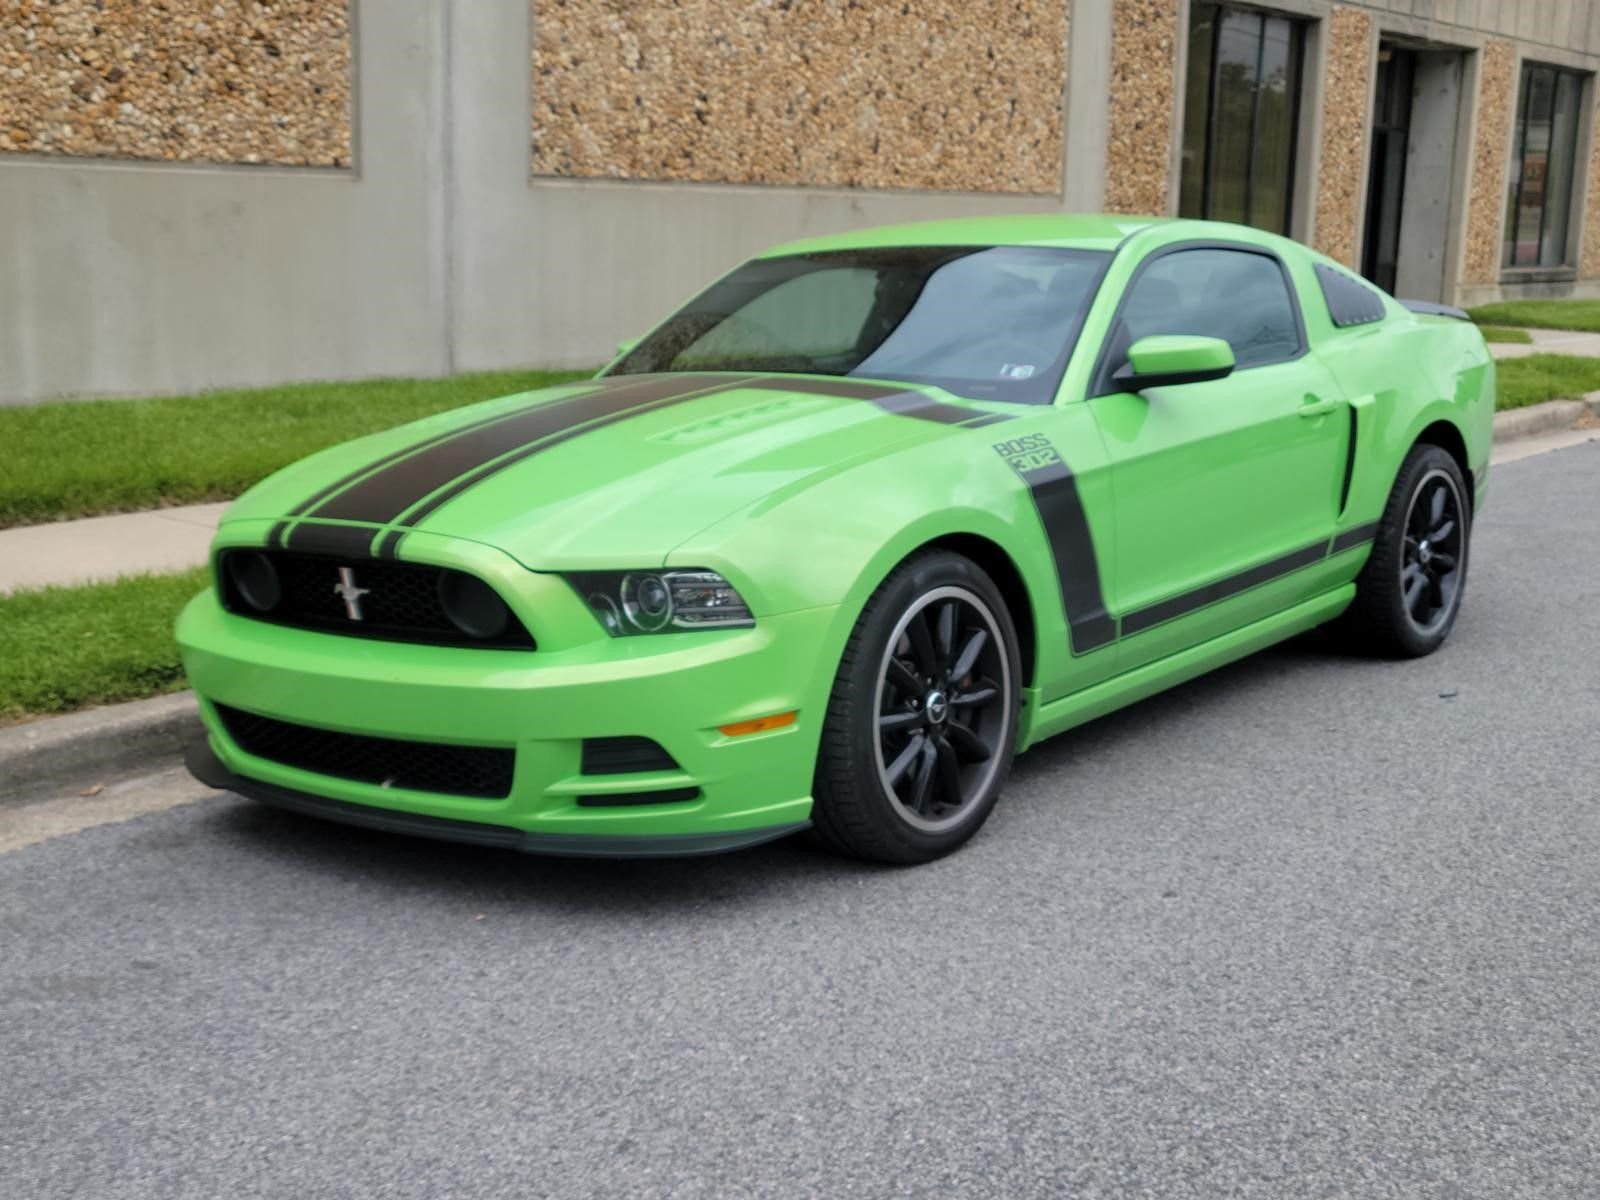 2013 ford mustang boss 302